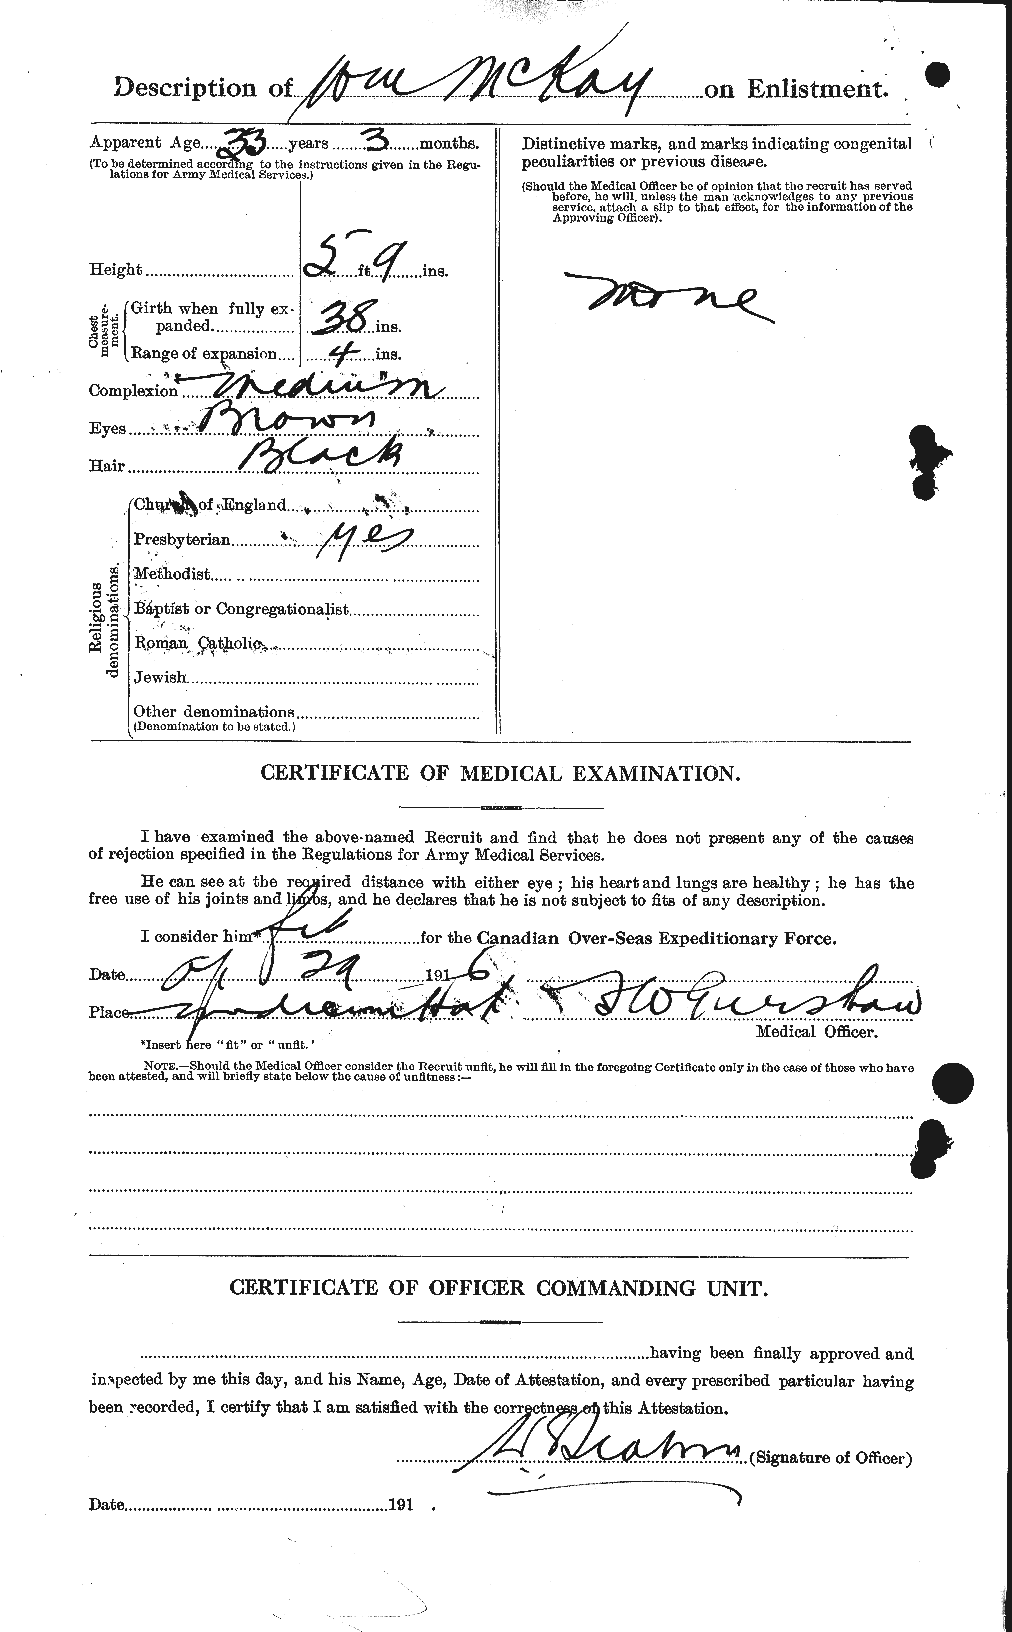 Personnel Records of the First World War - CEF 530224b